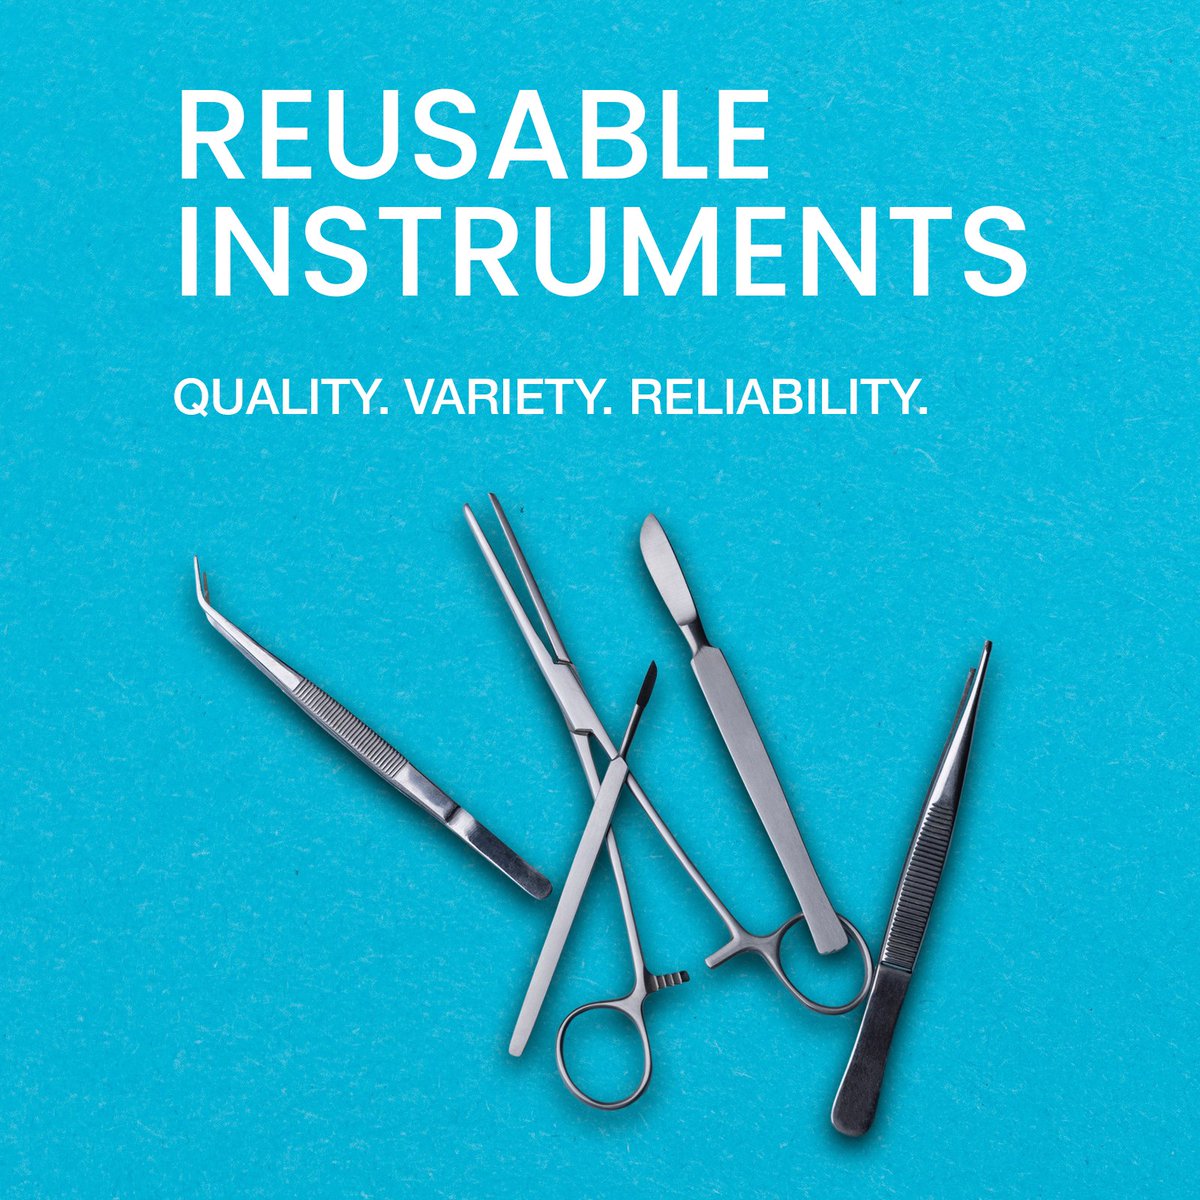 To learn more about our full line of reusable general and specialty surgical instruments, please contact the Trinity team at 800.829.8384 or customerservice@trinitysterile.com

#healthcare #minoritiesinmedicine #surgicalinstruments #trinitysterile #reuse